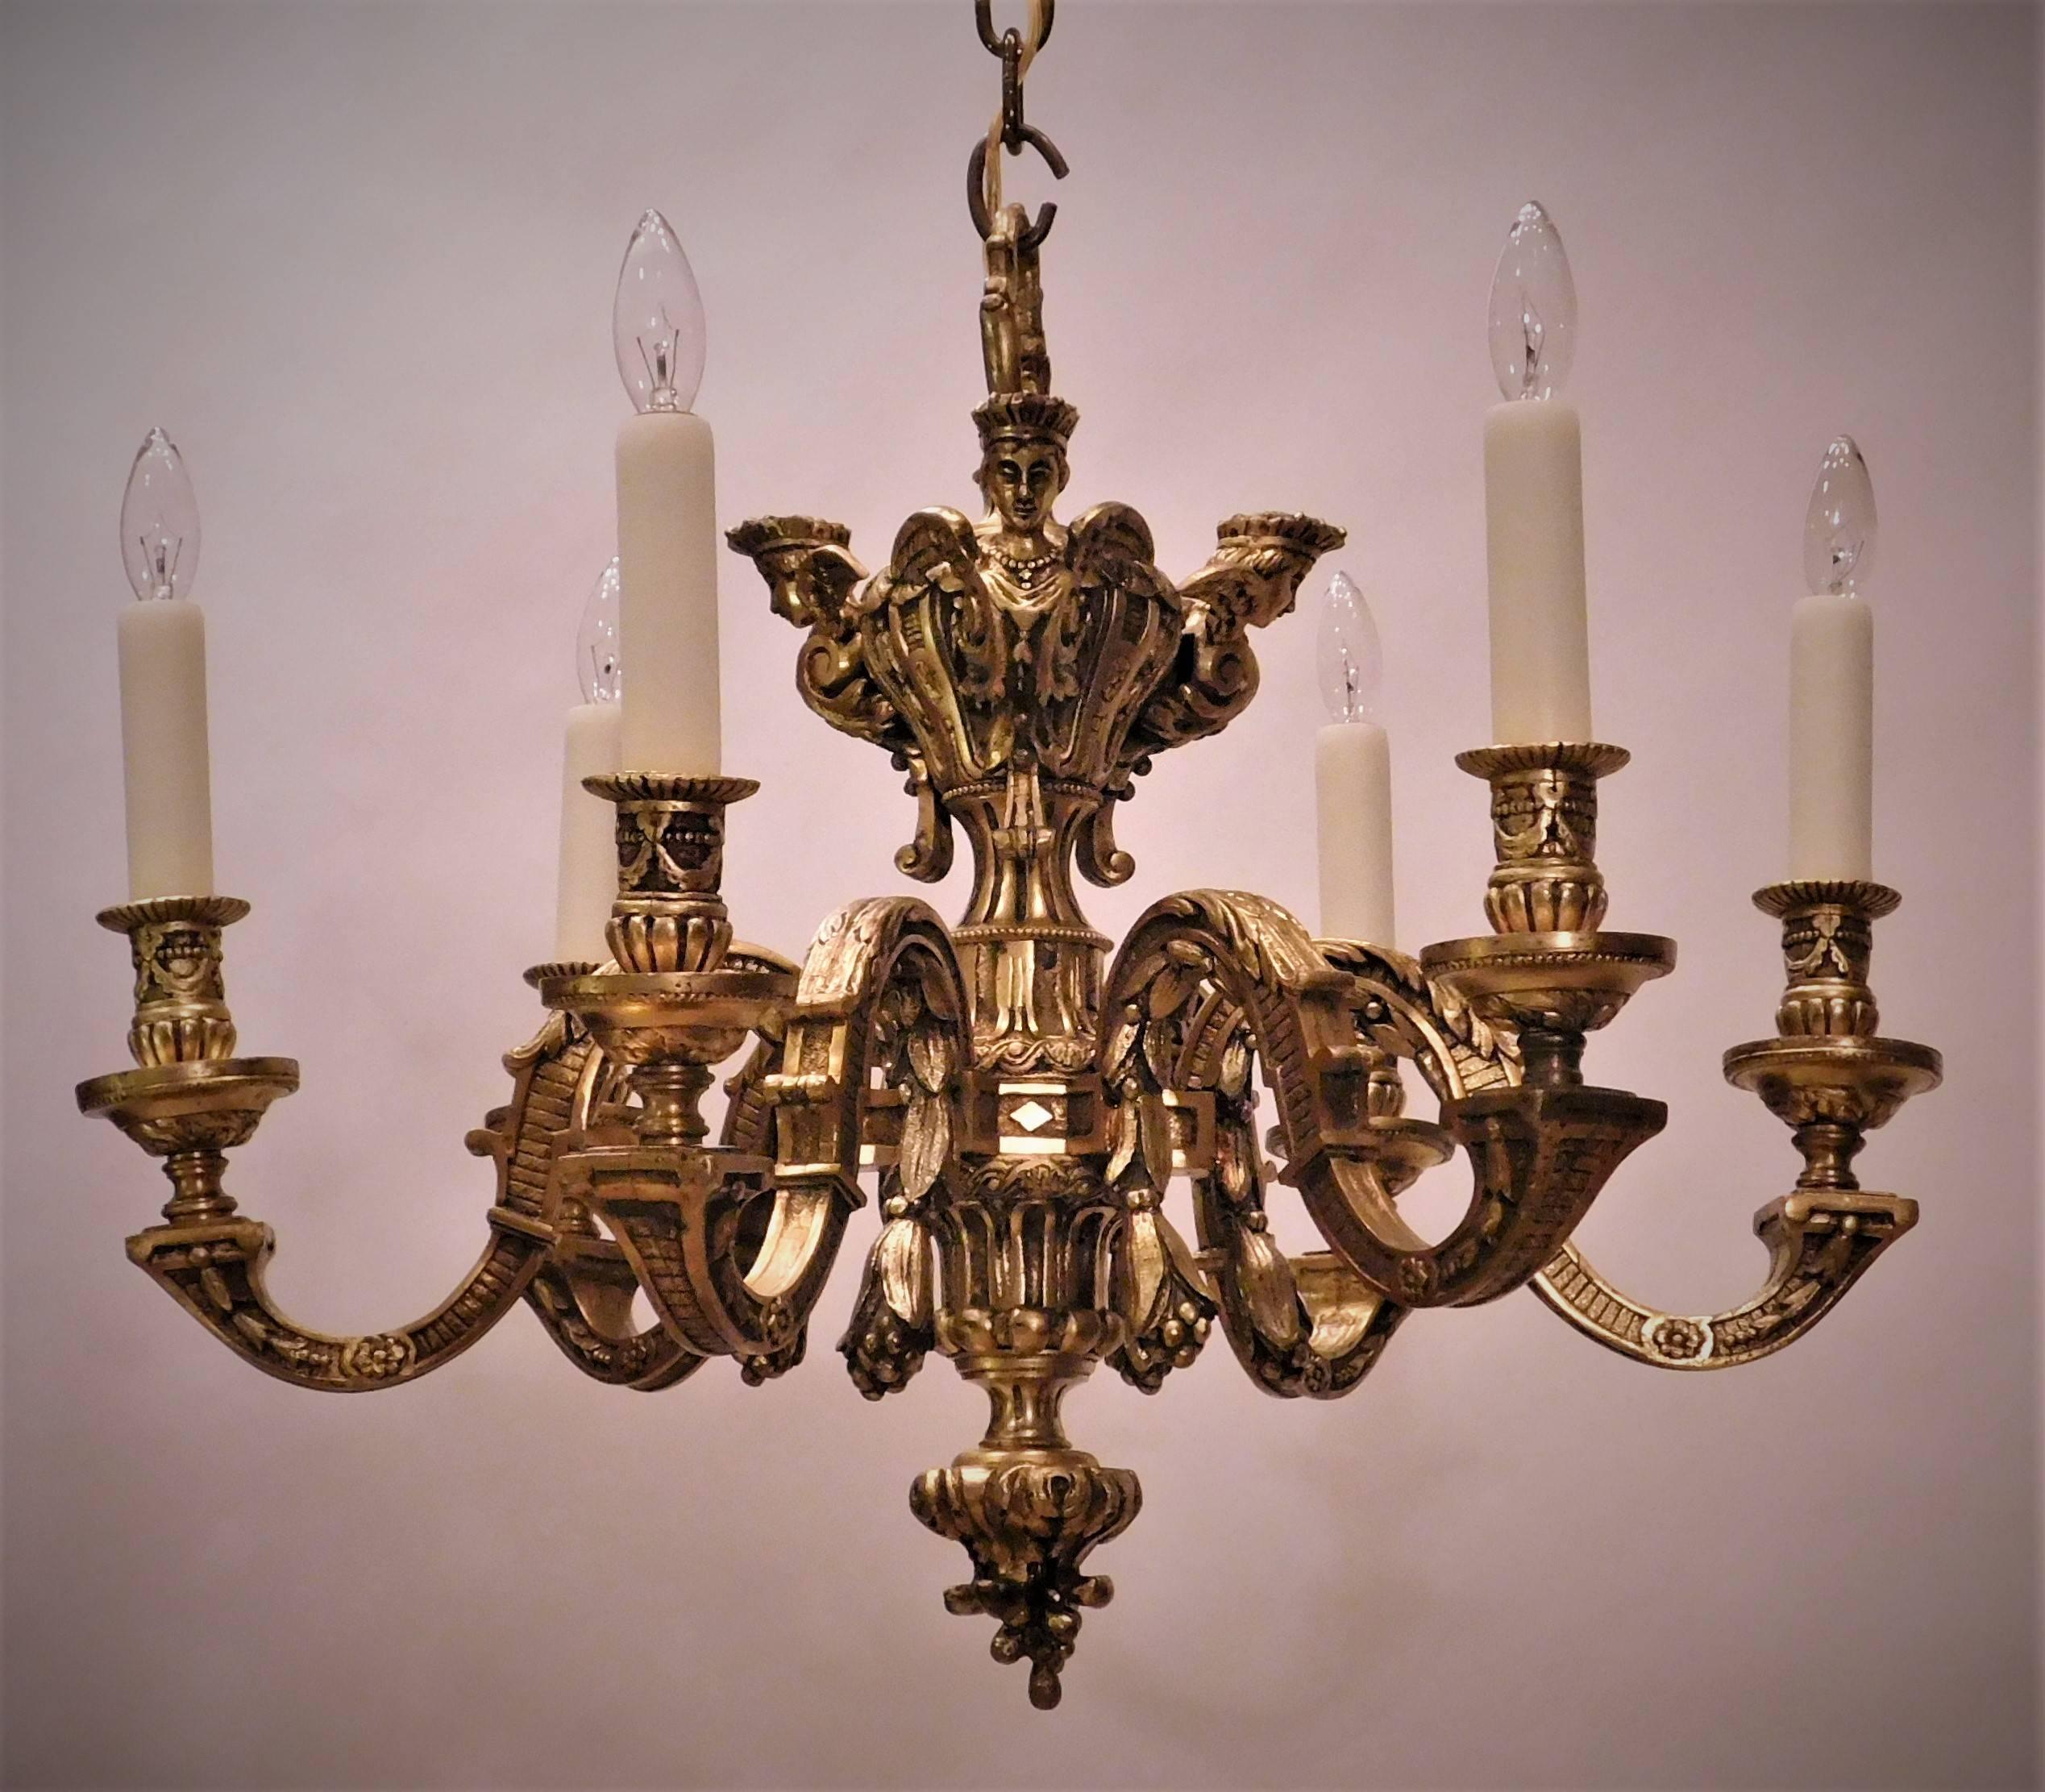 This Baroque style chandelier is hand cast guilt bronze which with age has acquired a beautiful patina. The castings are very intricate. including three female angels' heads. Includes ceiling cap, hanging hardware and one foot of chain (which brings